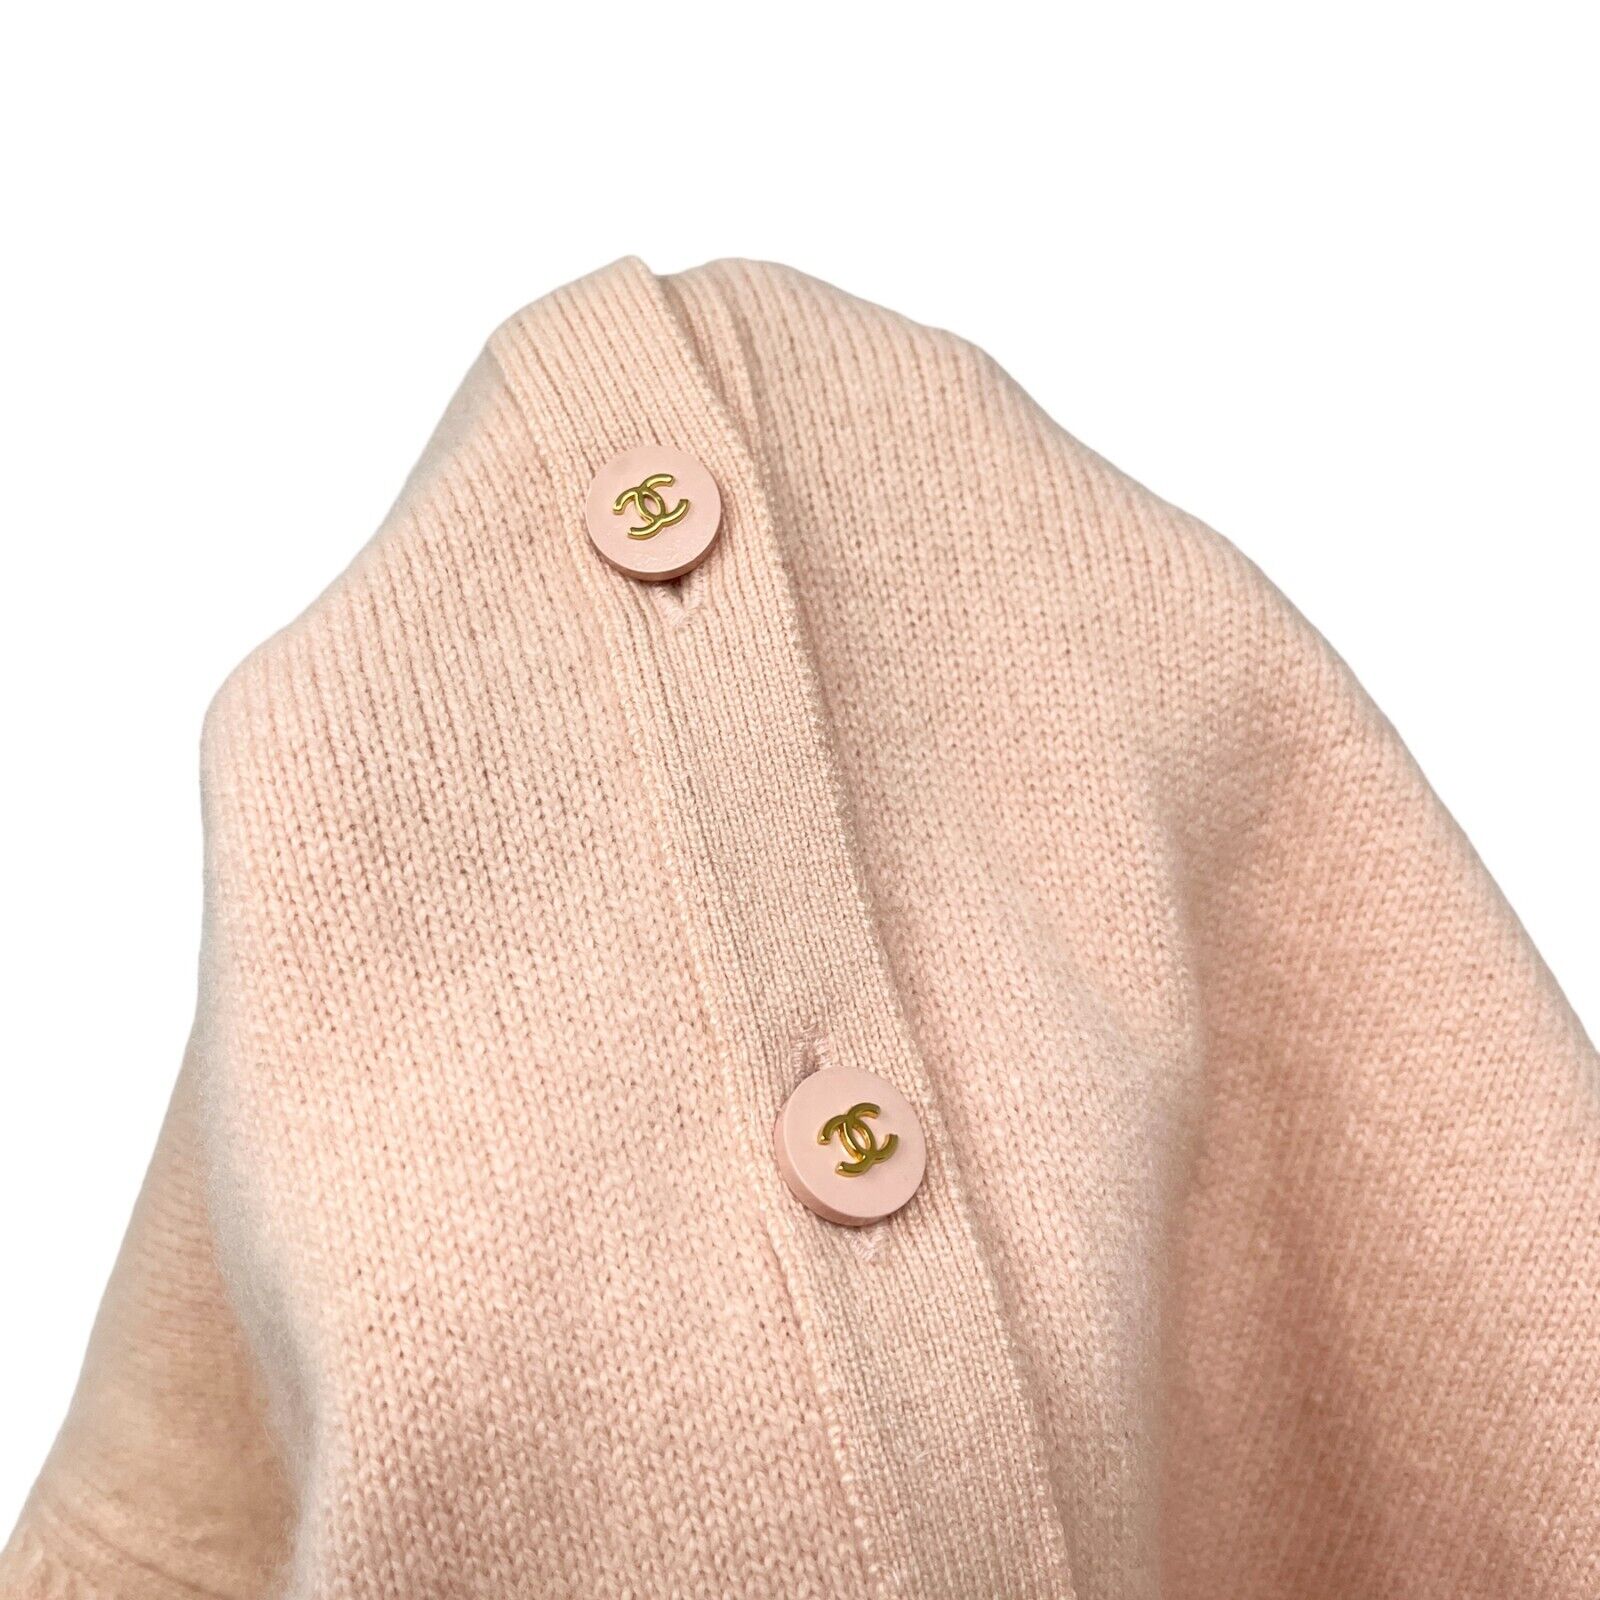 CHANEL Vintage CC Mark Button Cardigan Sweater Top Light Pink Cashmere Rank AB